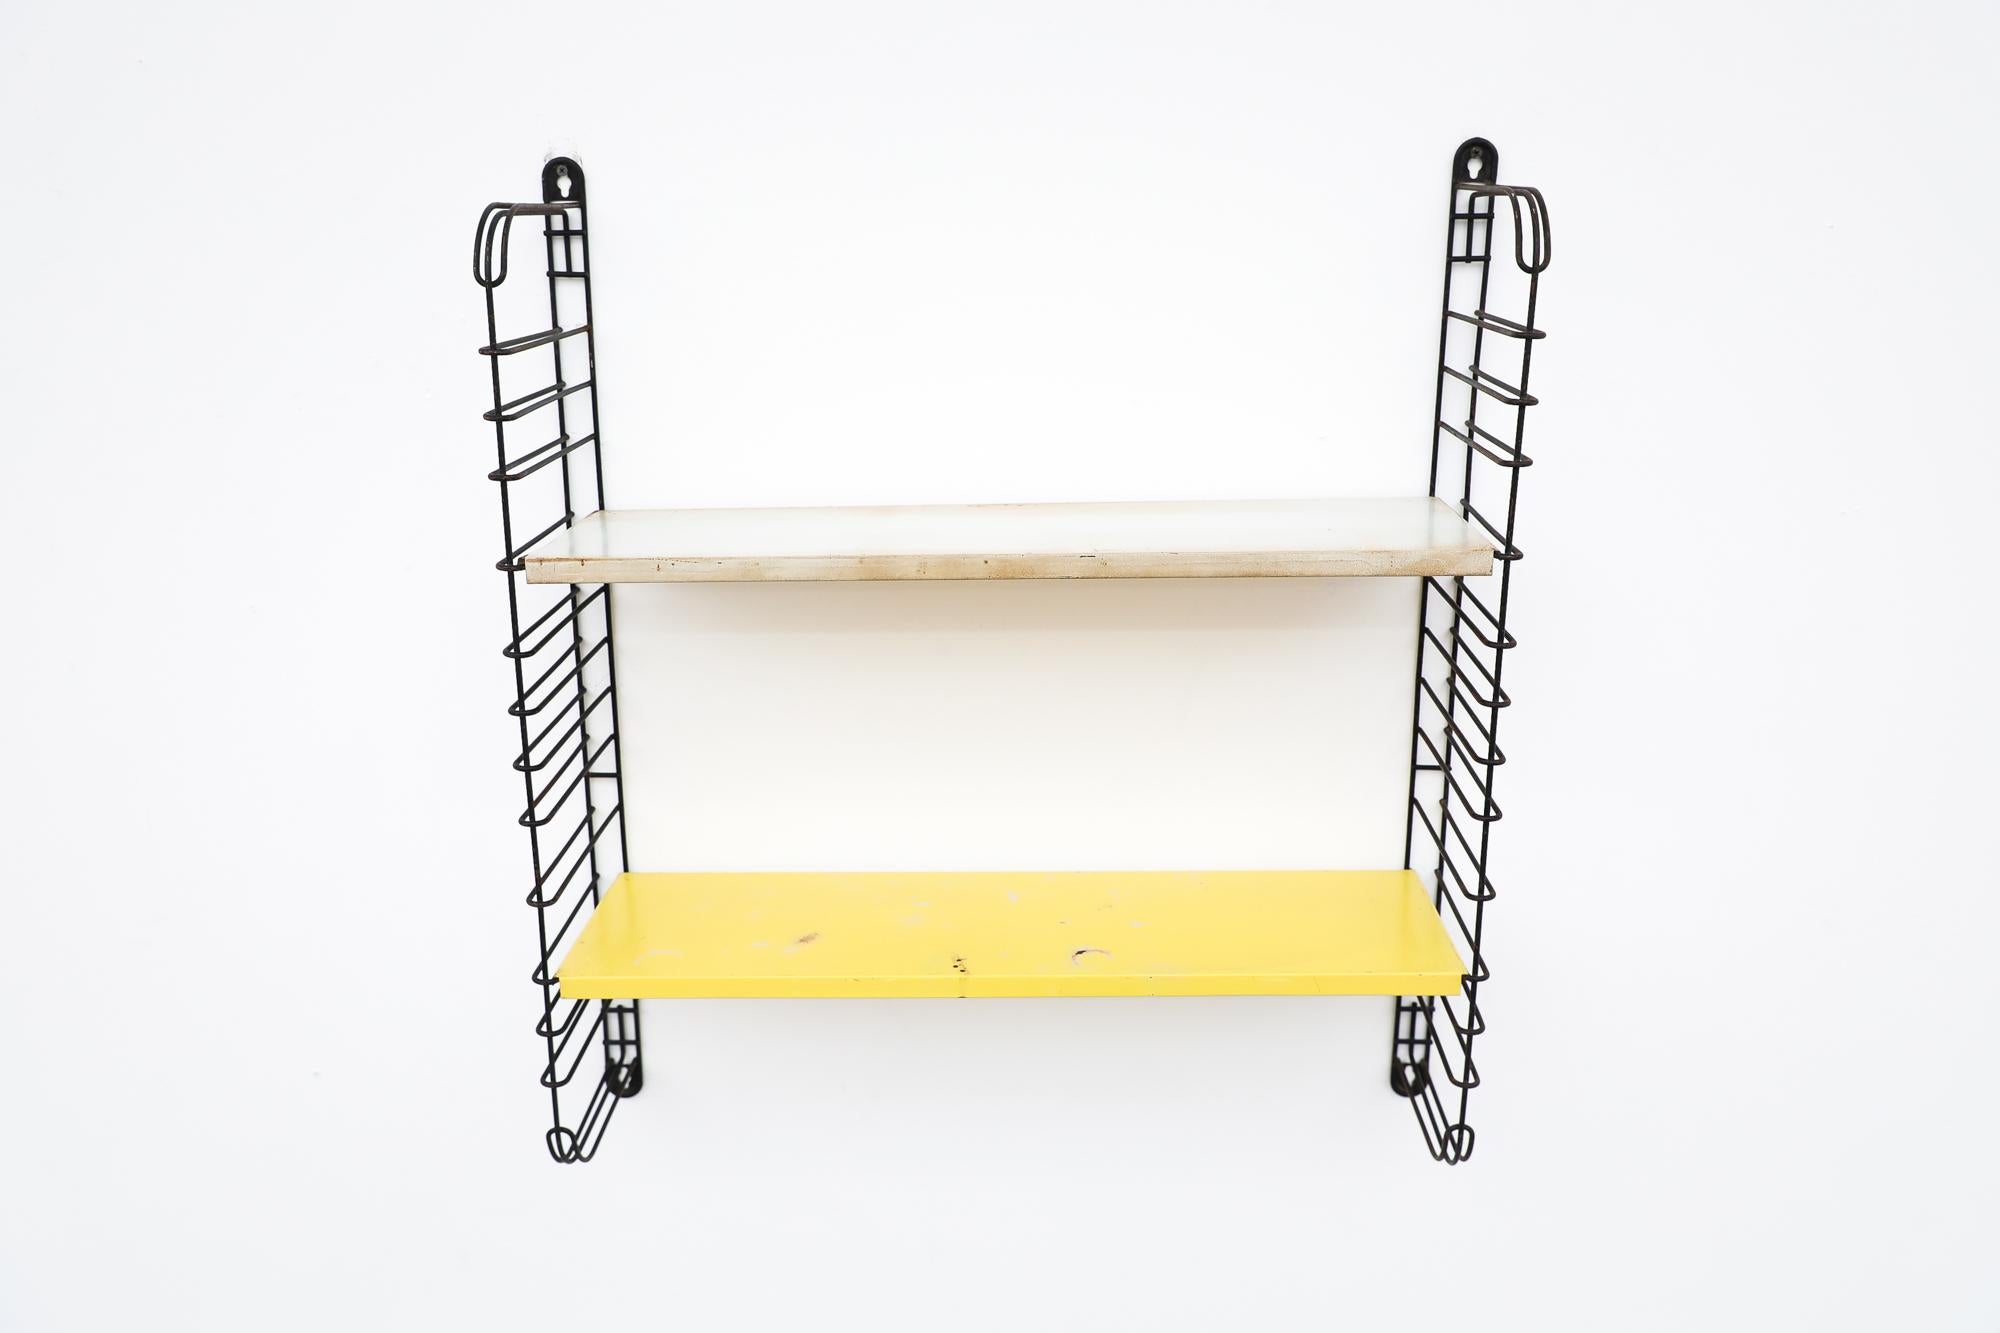 Mid-Century Modern Midcentury Tomado White and Yellow Industrial Shelving Unit